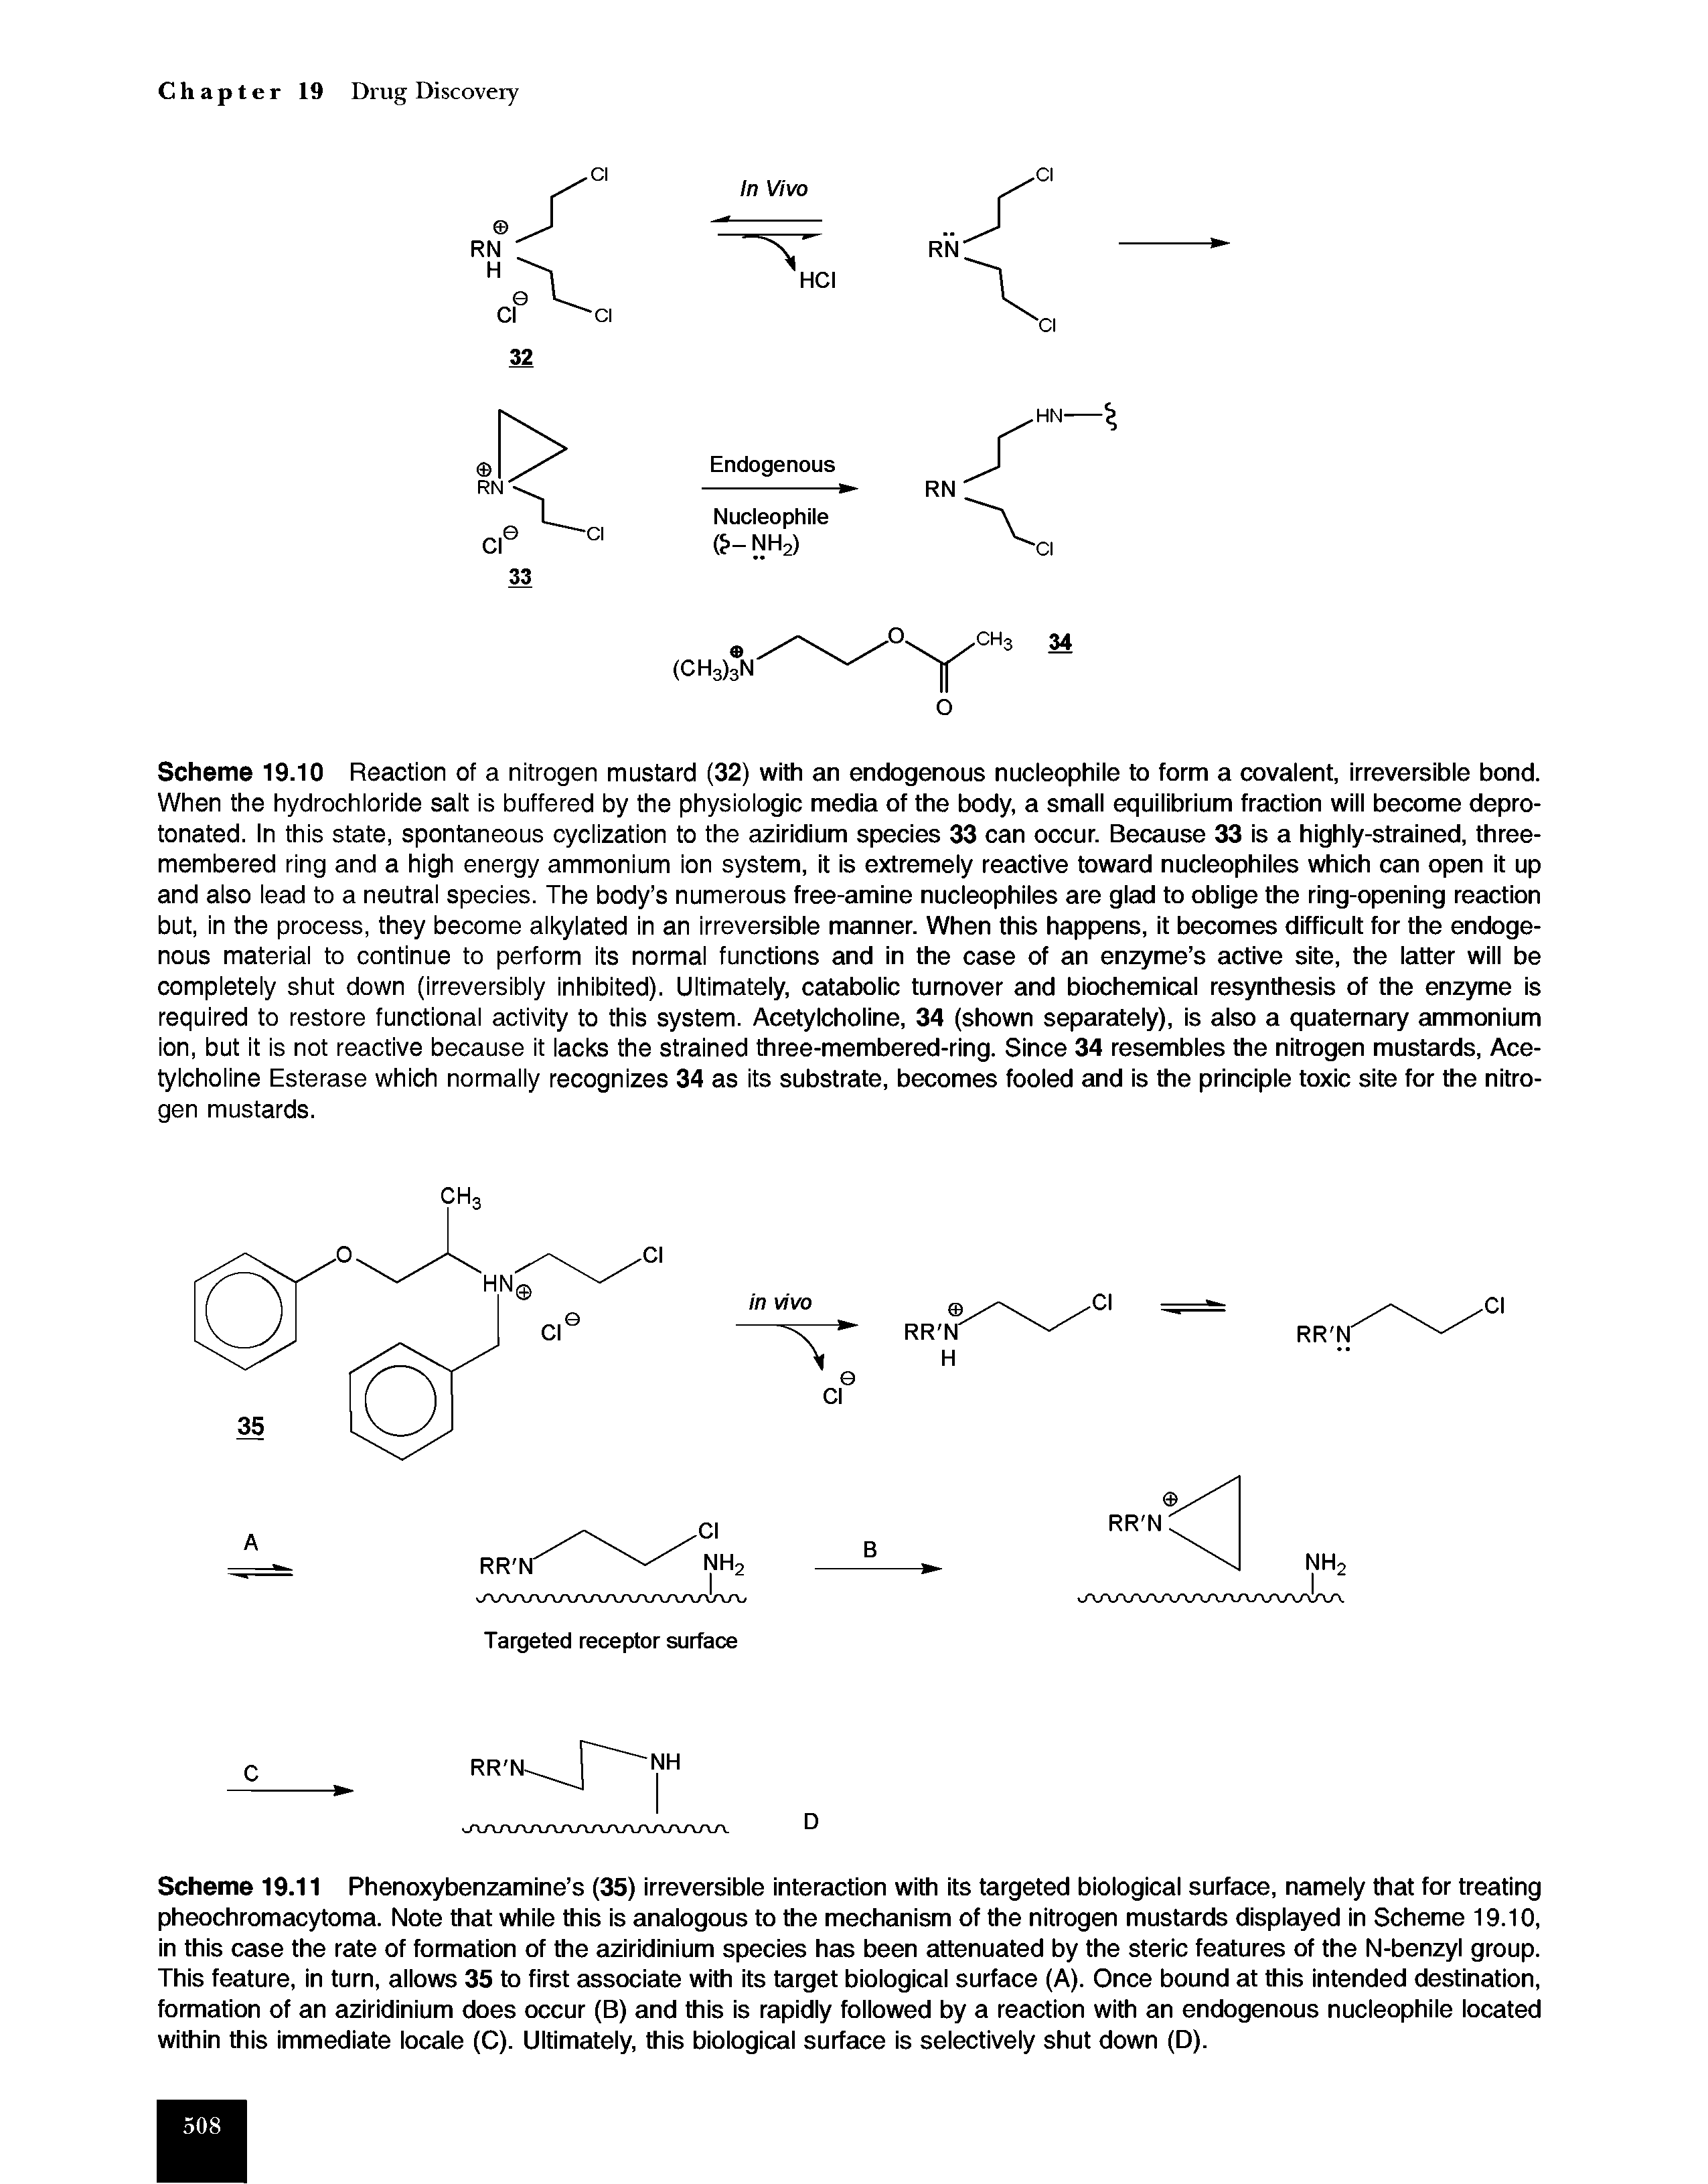 Scheme 19.11 Phenoxybenzamine s (35) irreversible interaction with its targeted biological surface, namely that for treating pheochromacytoma. Note that while this is analogous to the mechanism of the nitrogen mustards displayed in Scheme 19.10, in this case the rate of formation of the aziridinium species has been attenuated by the steric features of the N-benzyl group. This feature, in turn, allows 35 to first associate with its target biological surface (A). Once bound at this intended destination, formation of an aziridinium does occur (B) and this is rapidly followed by a reaction with an endogenous nucleophile located within this immediate locale (C). Ultimately, this biological surface is selectively shut down (D).